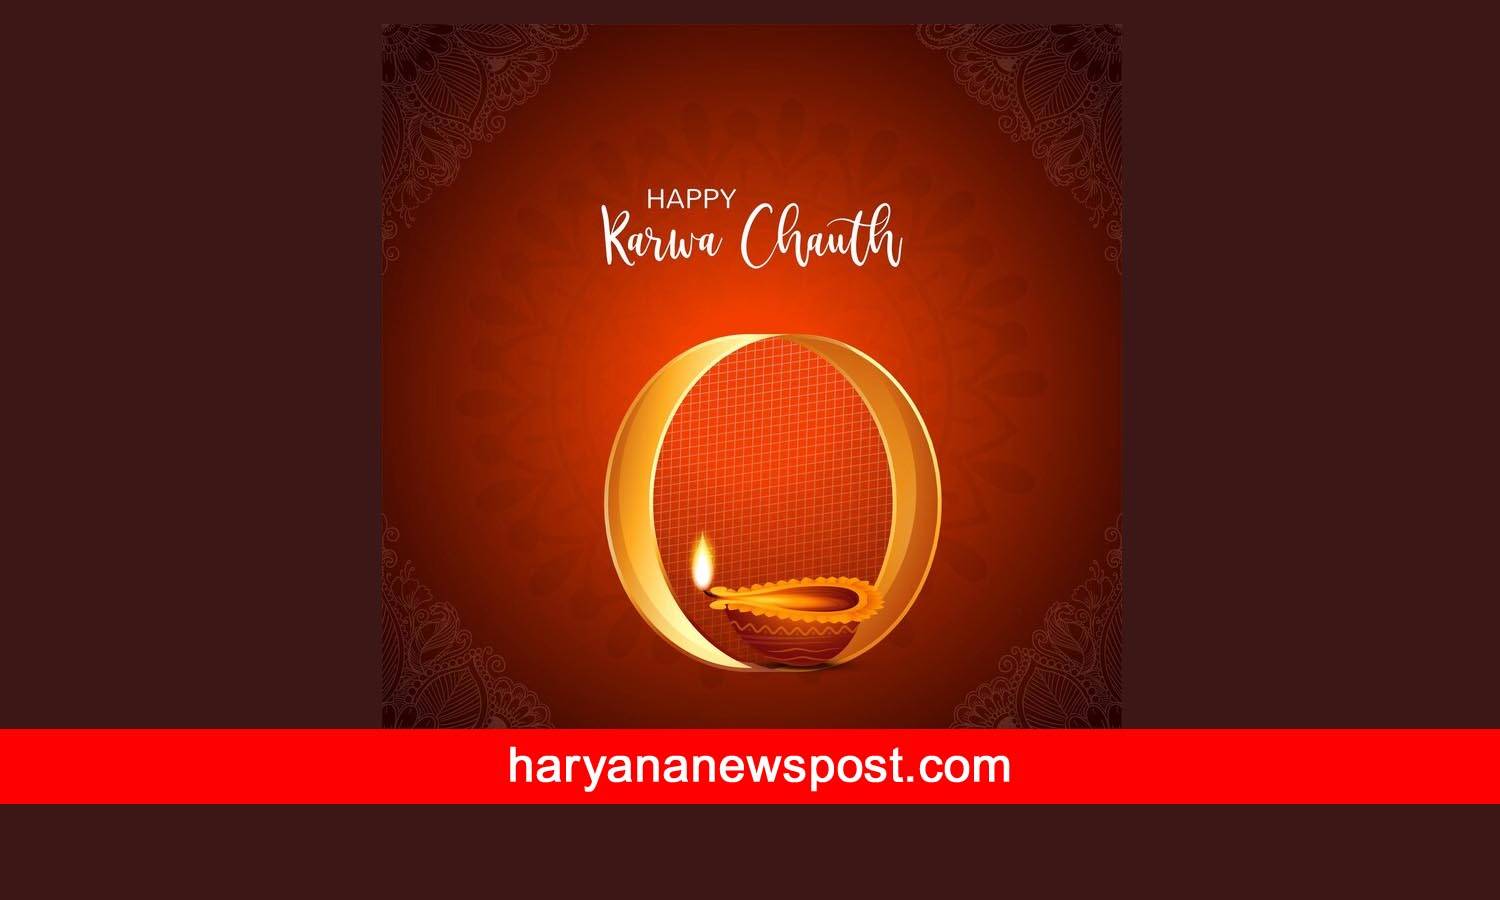 Couple Karwa Chauth Messages - Karva Chauth Wishes for Couples